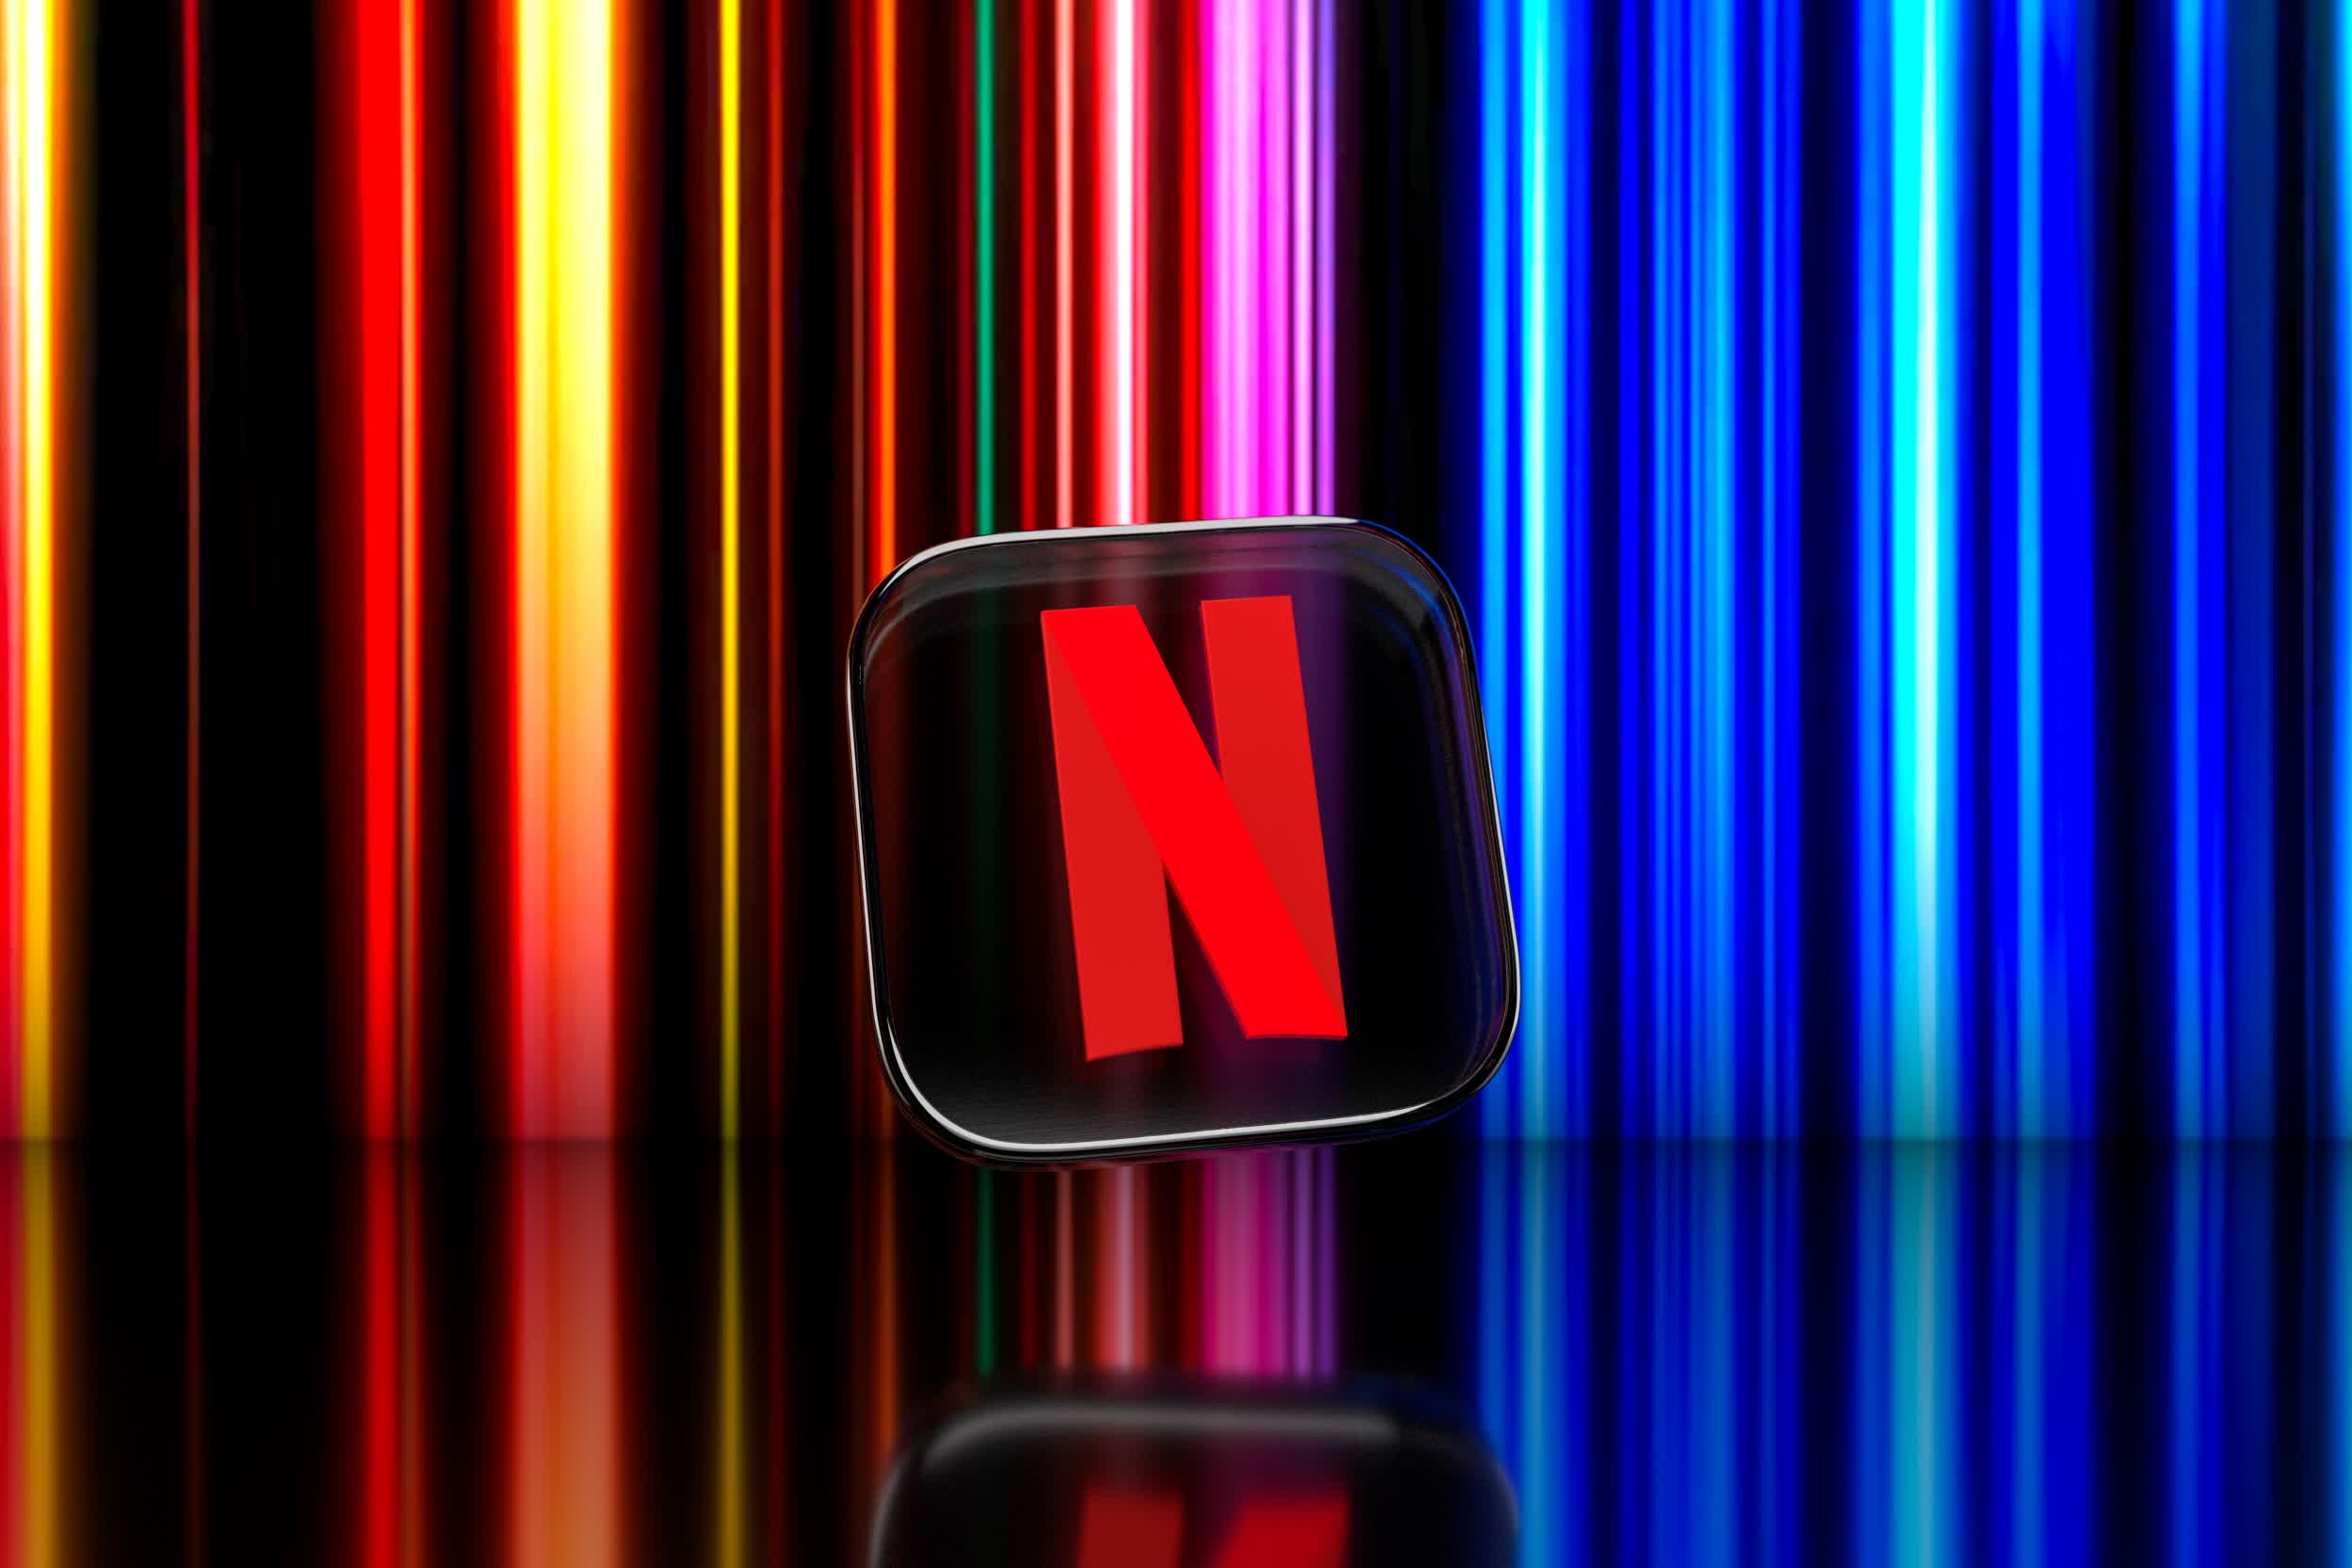 Netflix loses 25% of its value due to slowing subscriber growth thumbnail